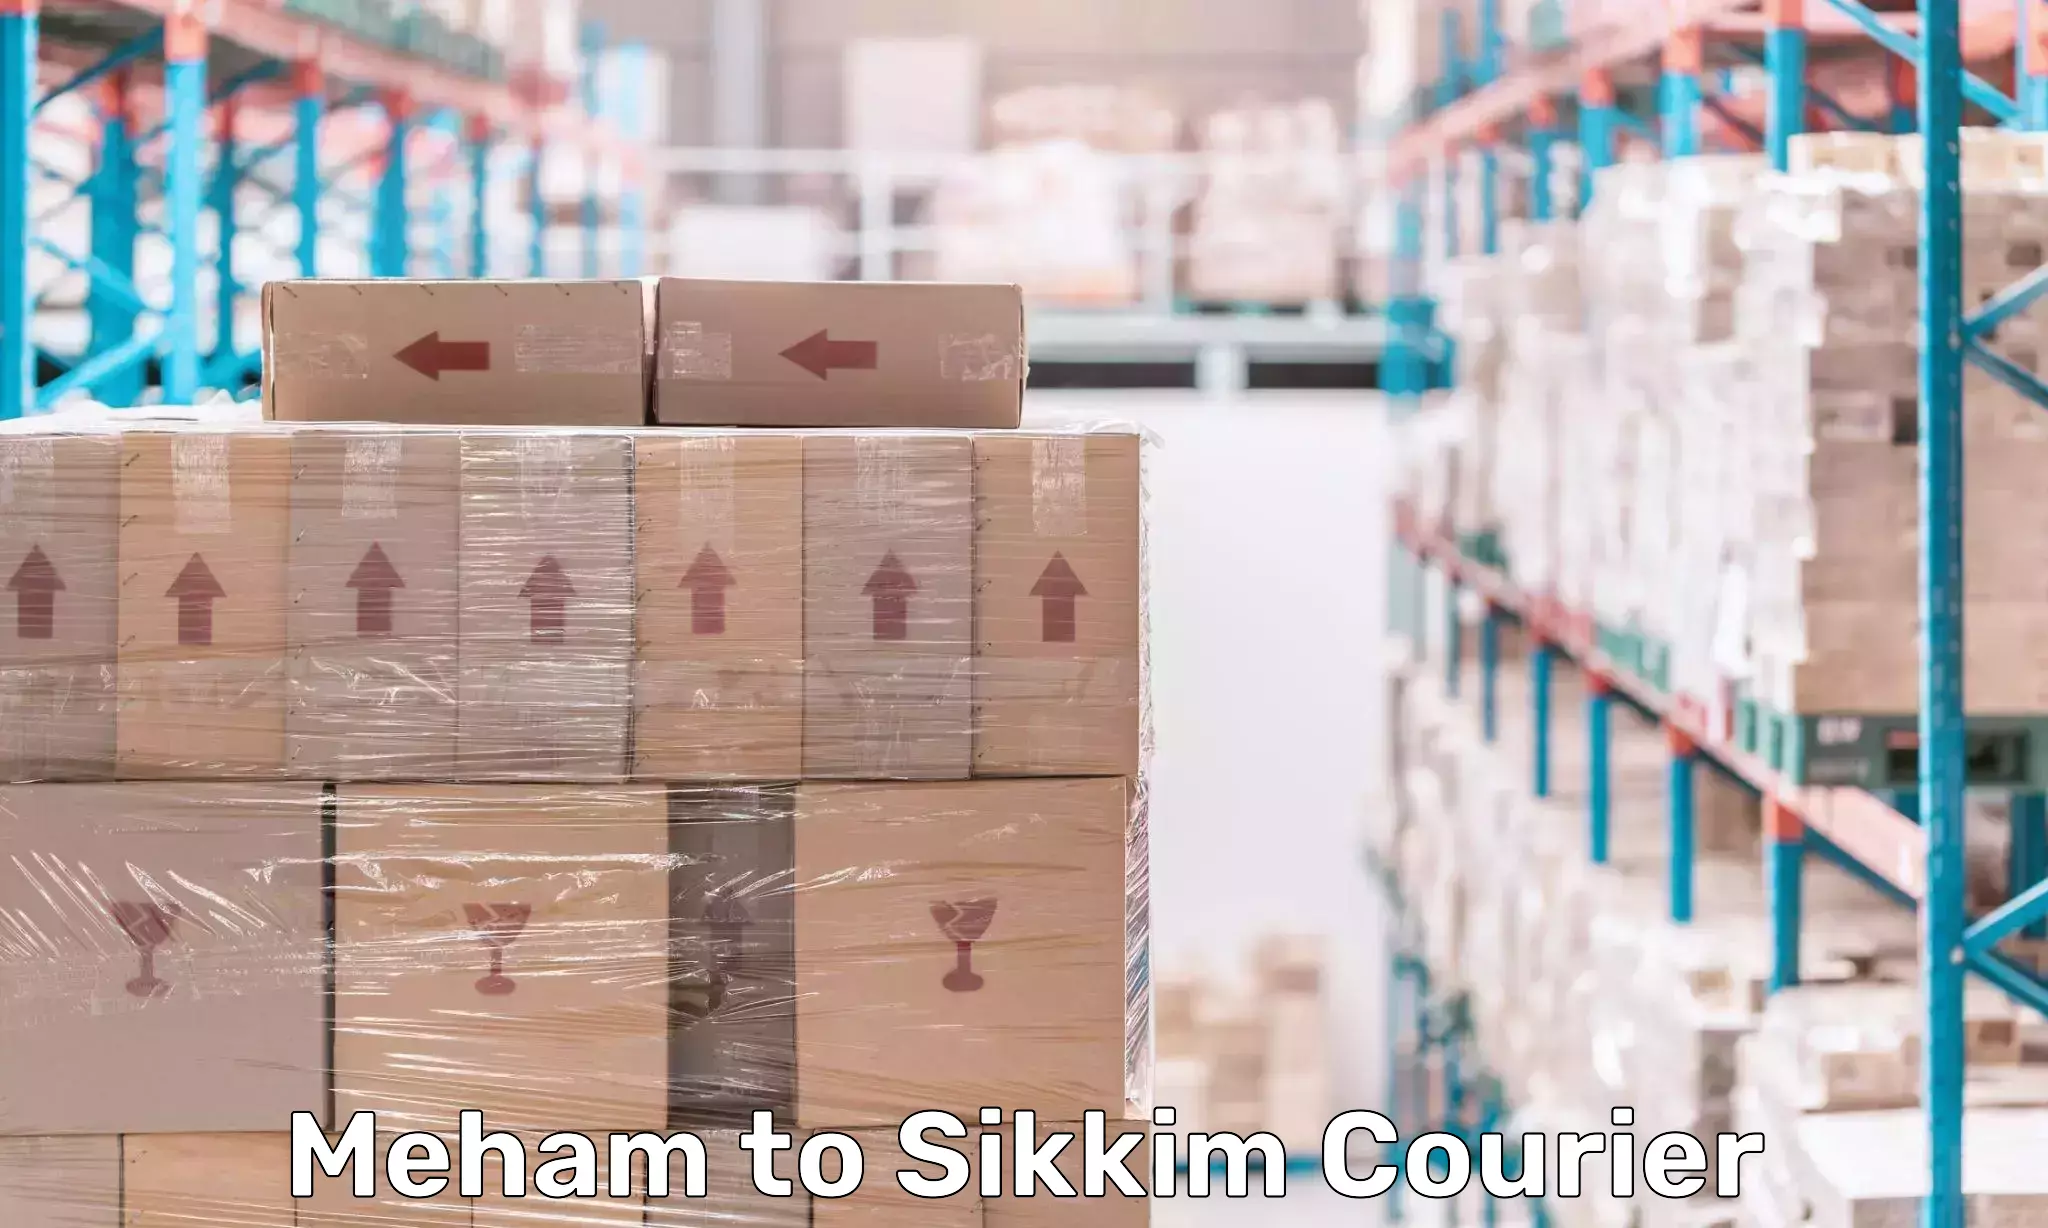 International courier networks Meham to Pelling